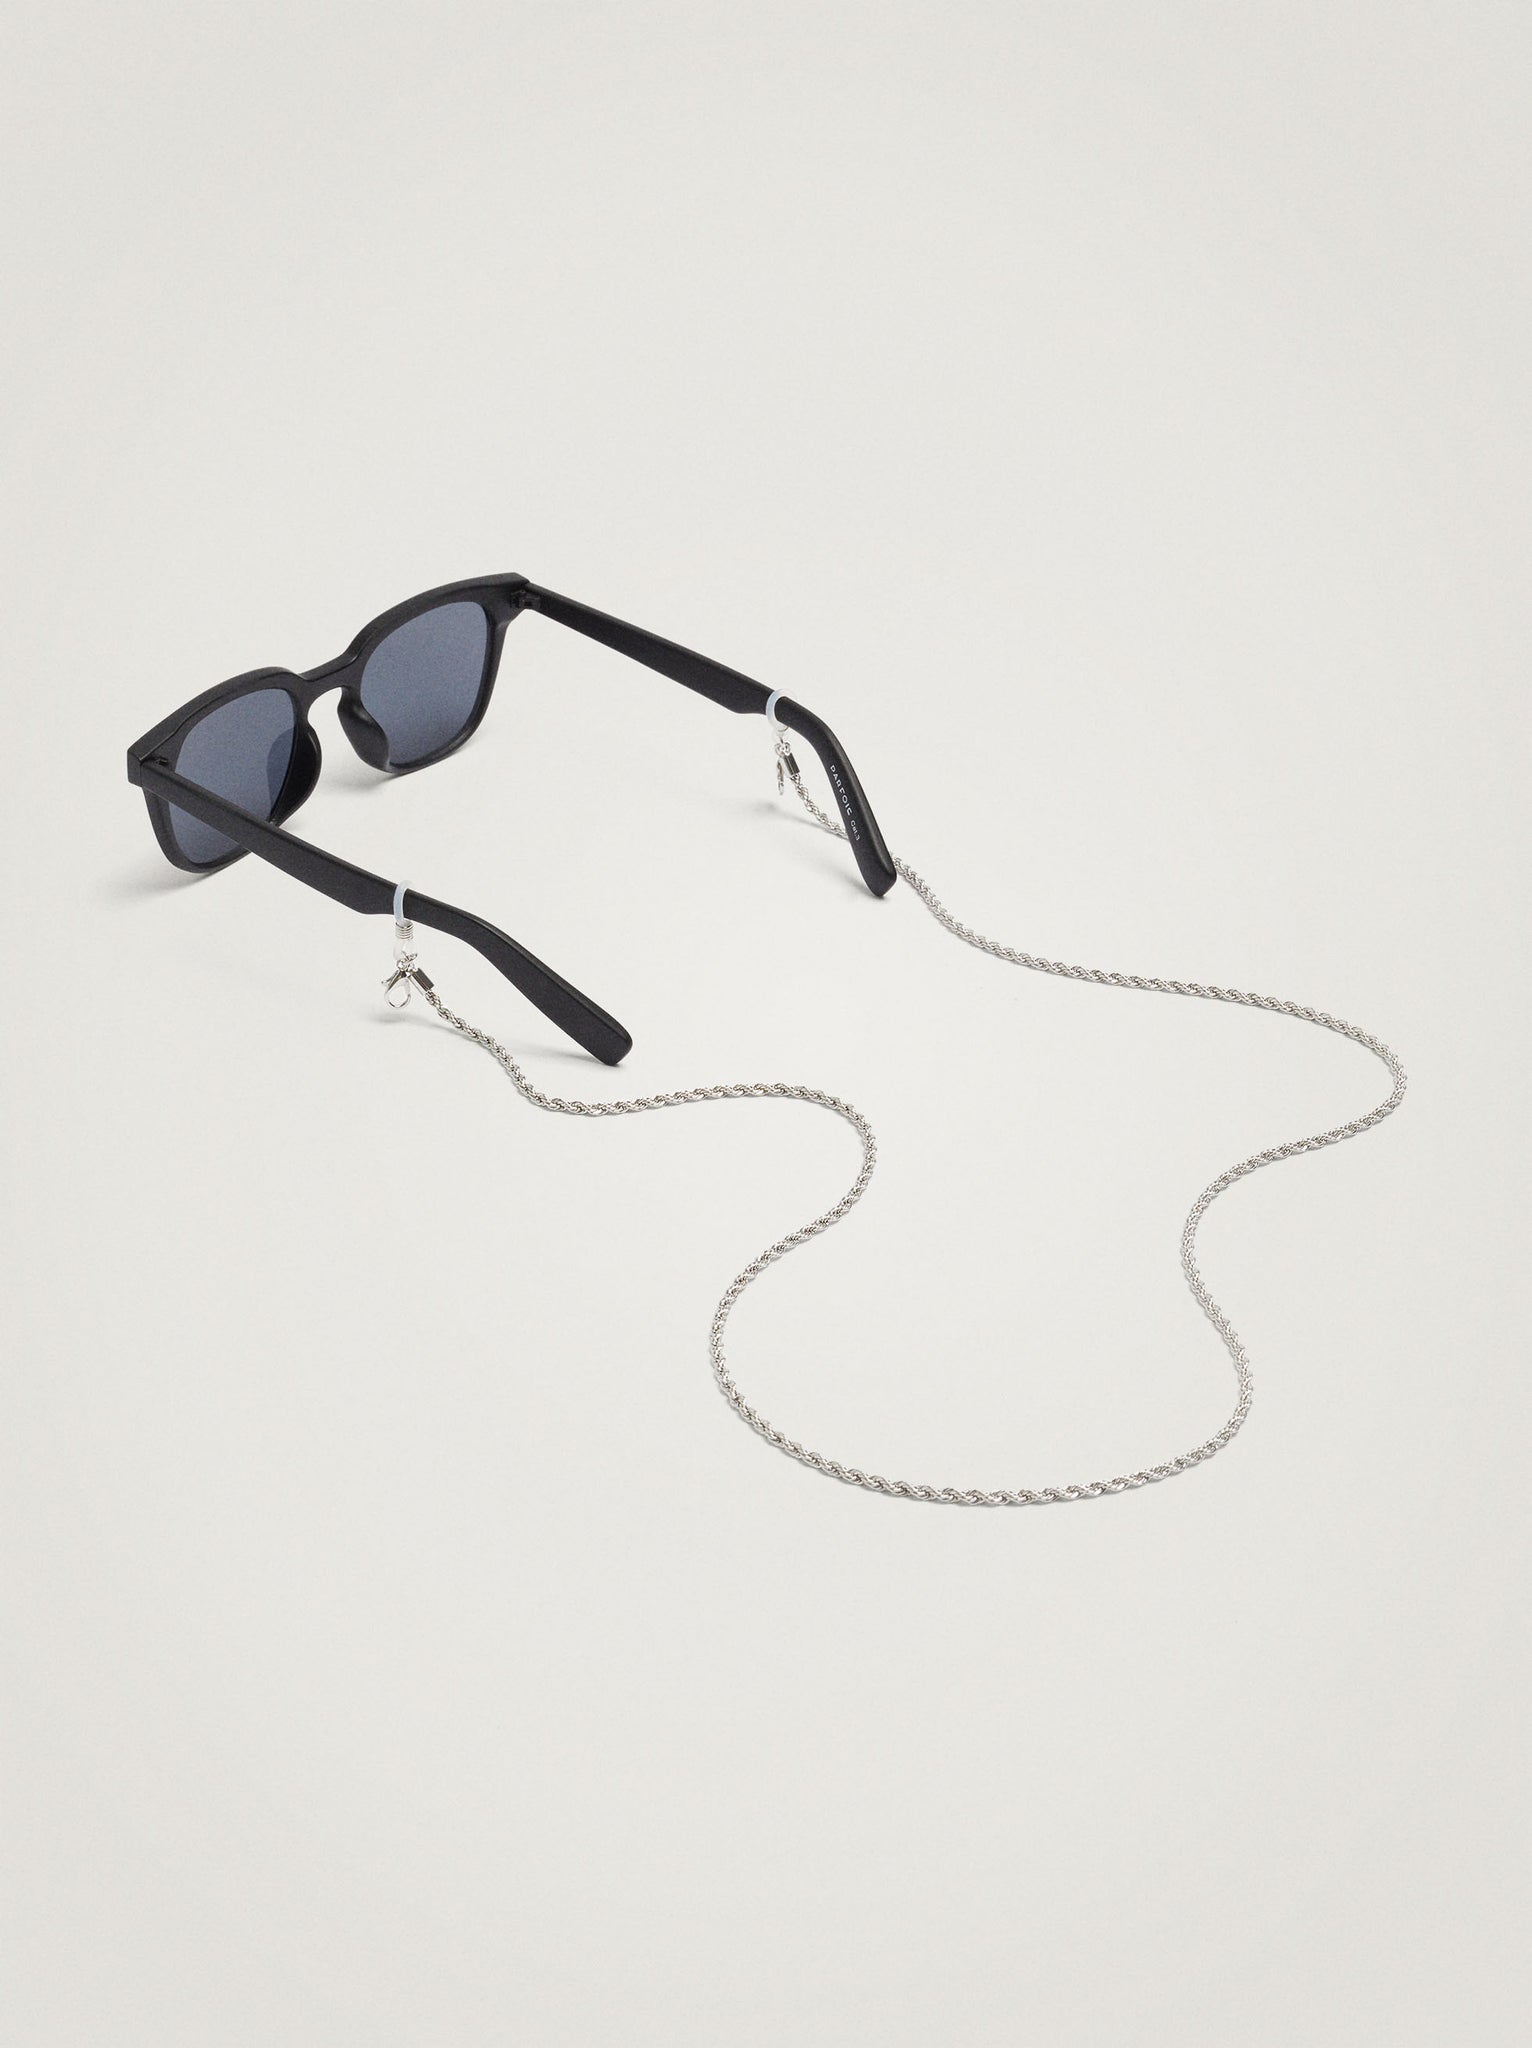 Silver Chain For Sunglasses Or Mask